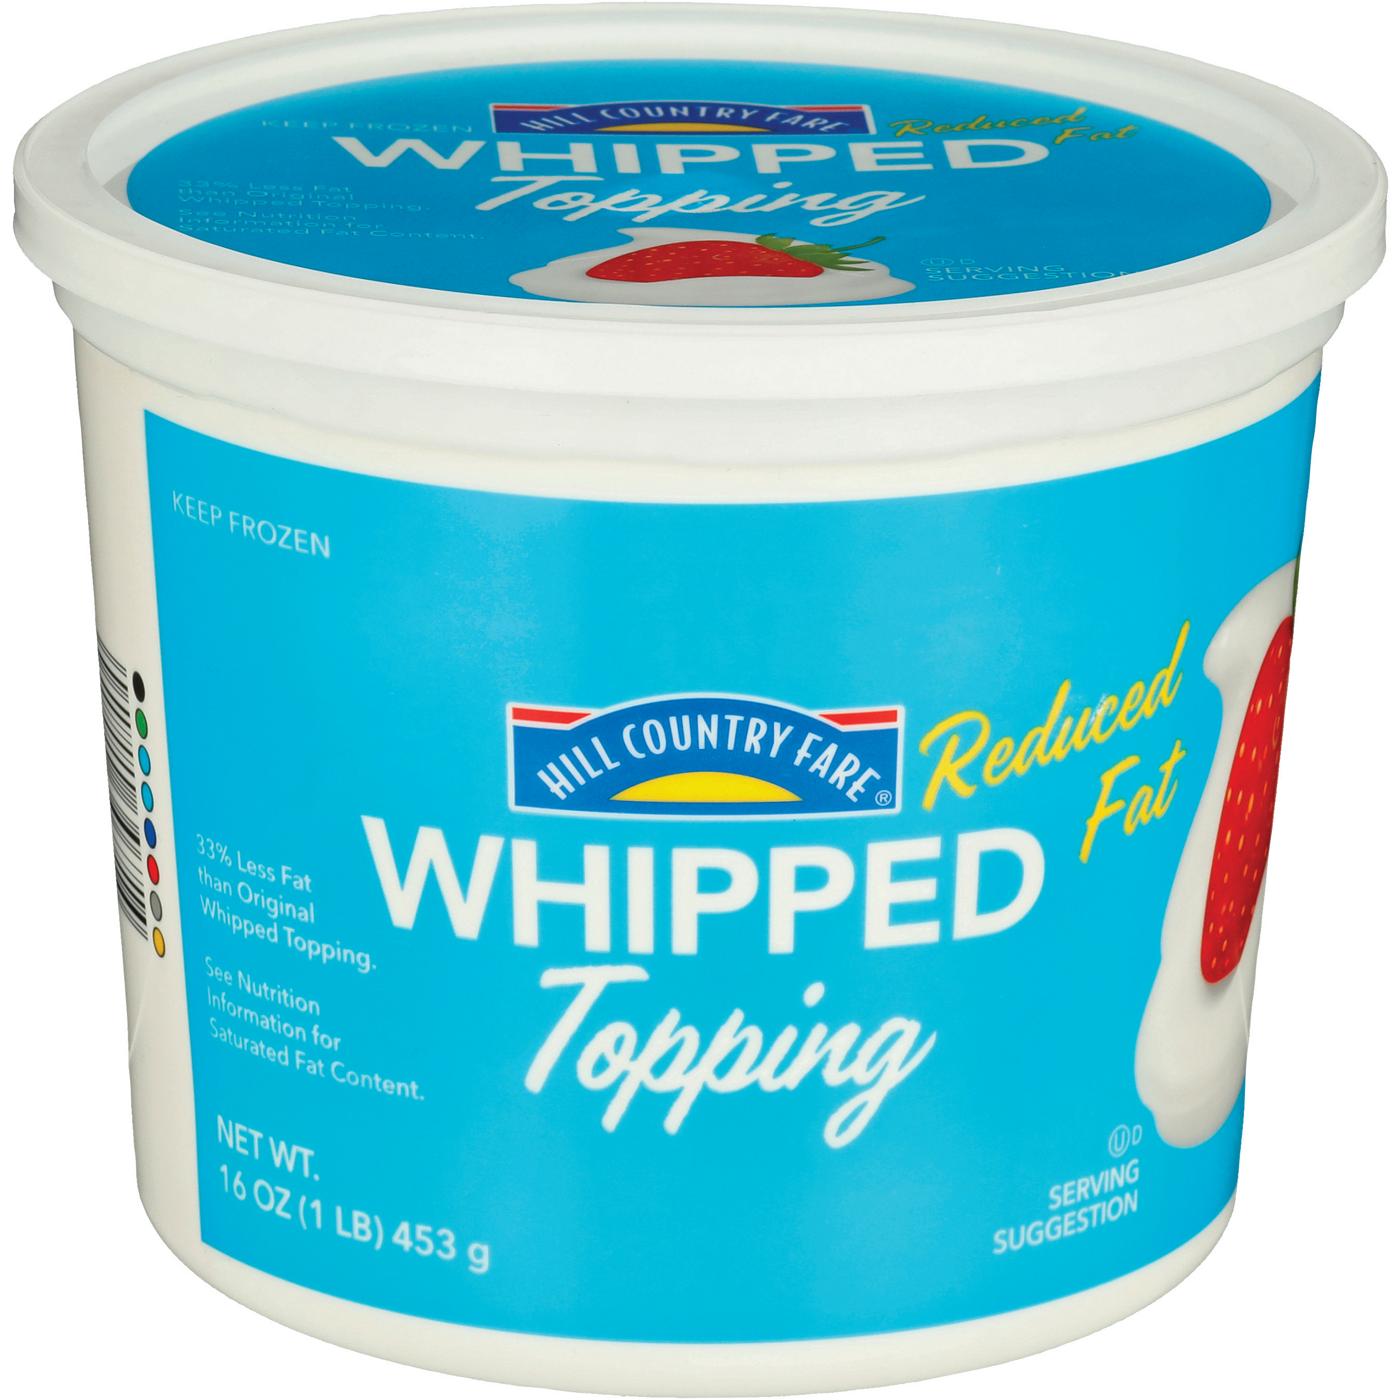 Hill Country Fare Reduced Fat Whipped Topping; image 1 of 2